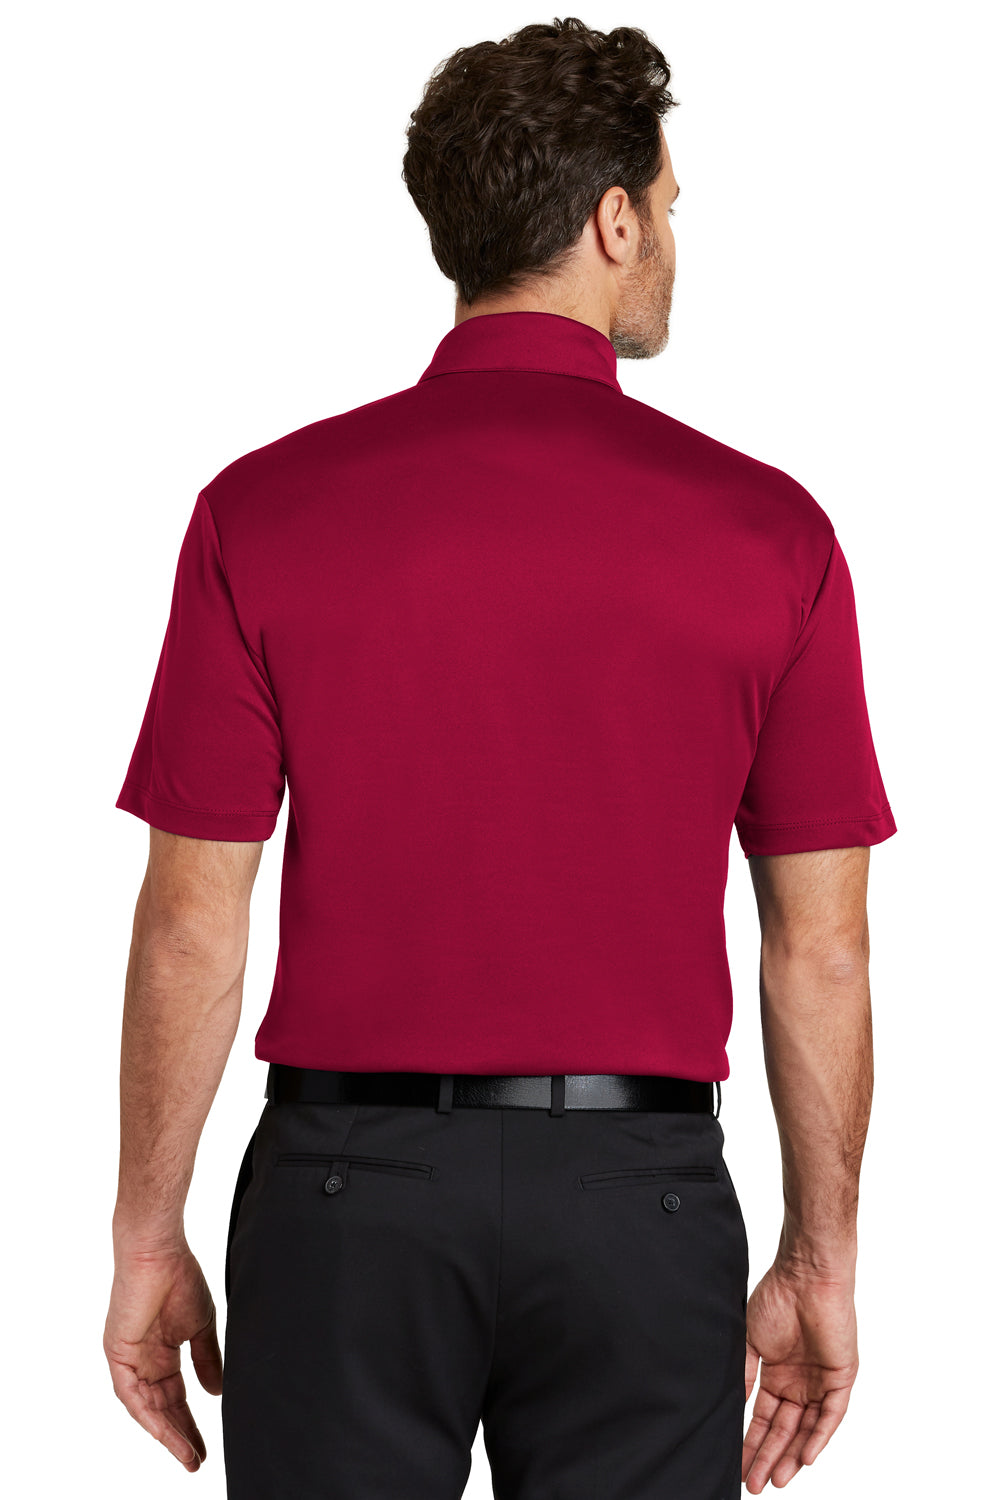 Port Authority K540 Mens Silk Touch Performance Moisture Wicking Short Sleeve Polo Shirt Red Back